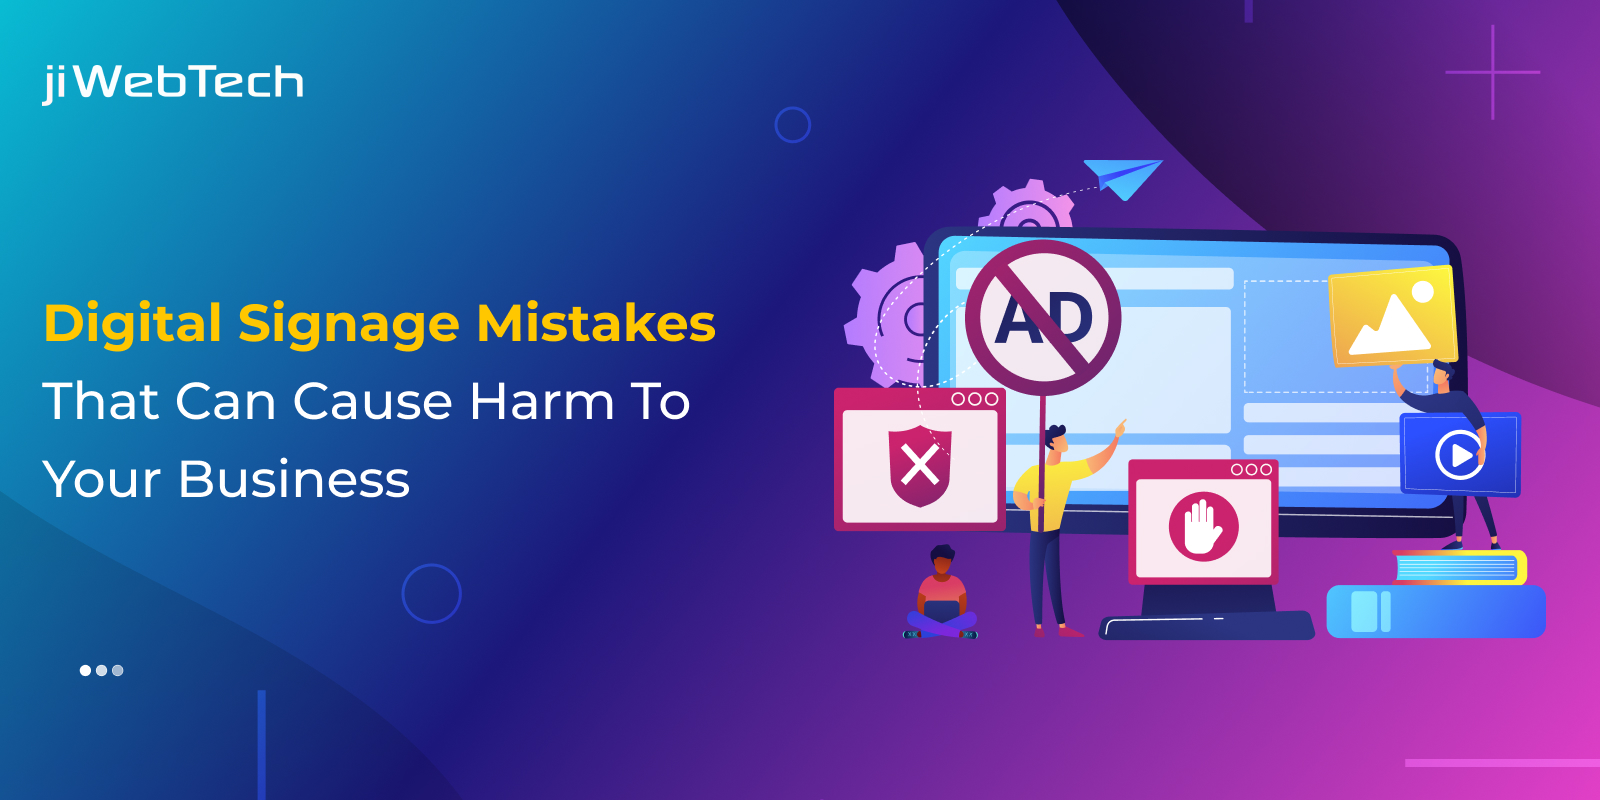 Digital Signage Mistakes That Can Cause Harm To Your Business